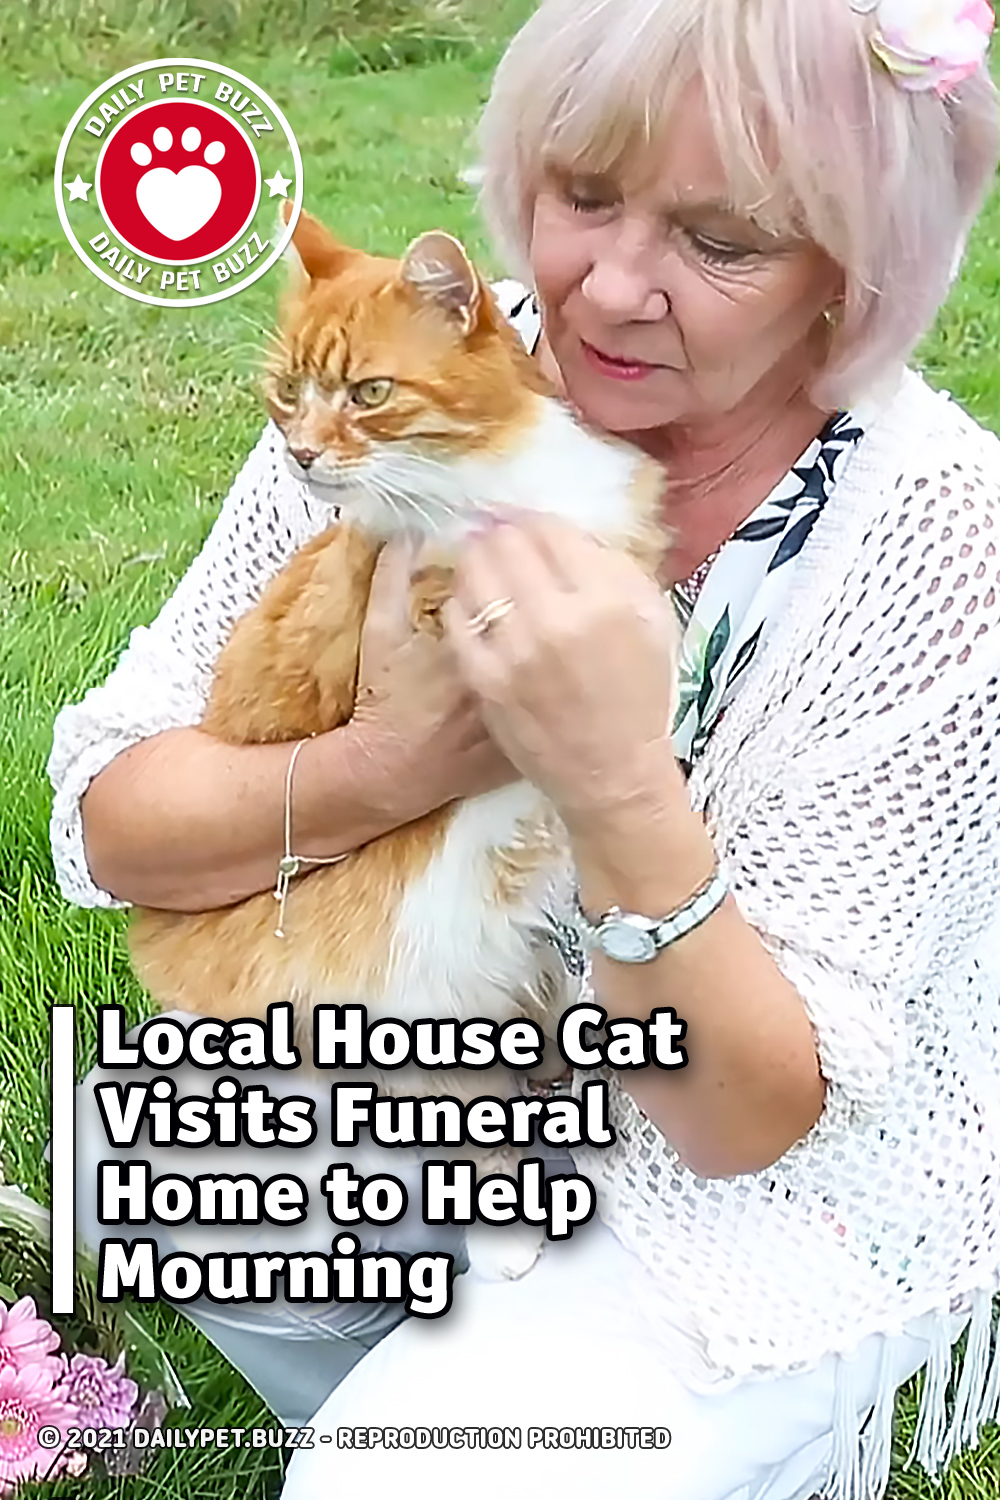 Local House Cat Visits Funeral Home to Help Those In Mourning